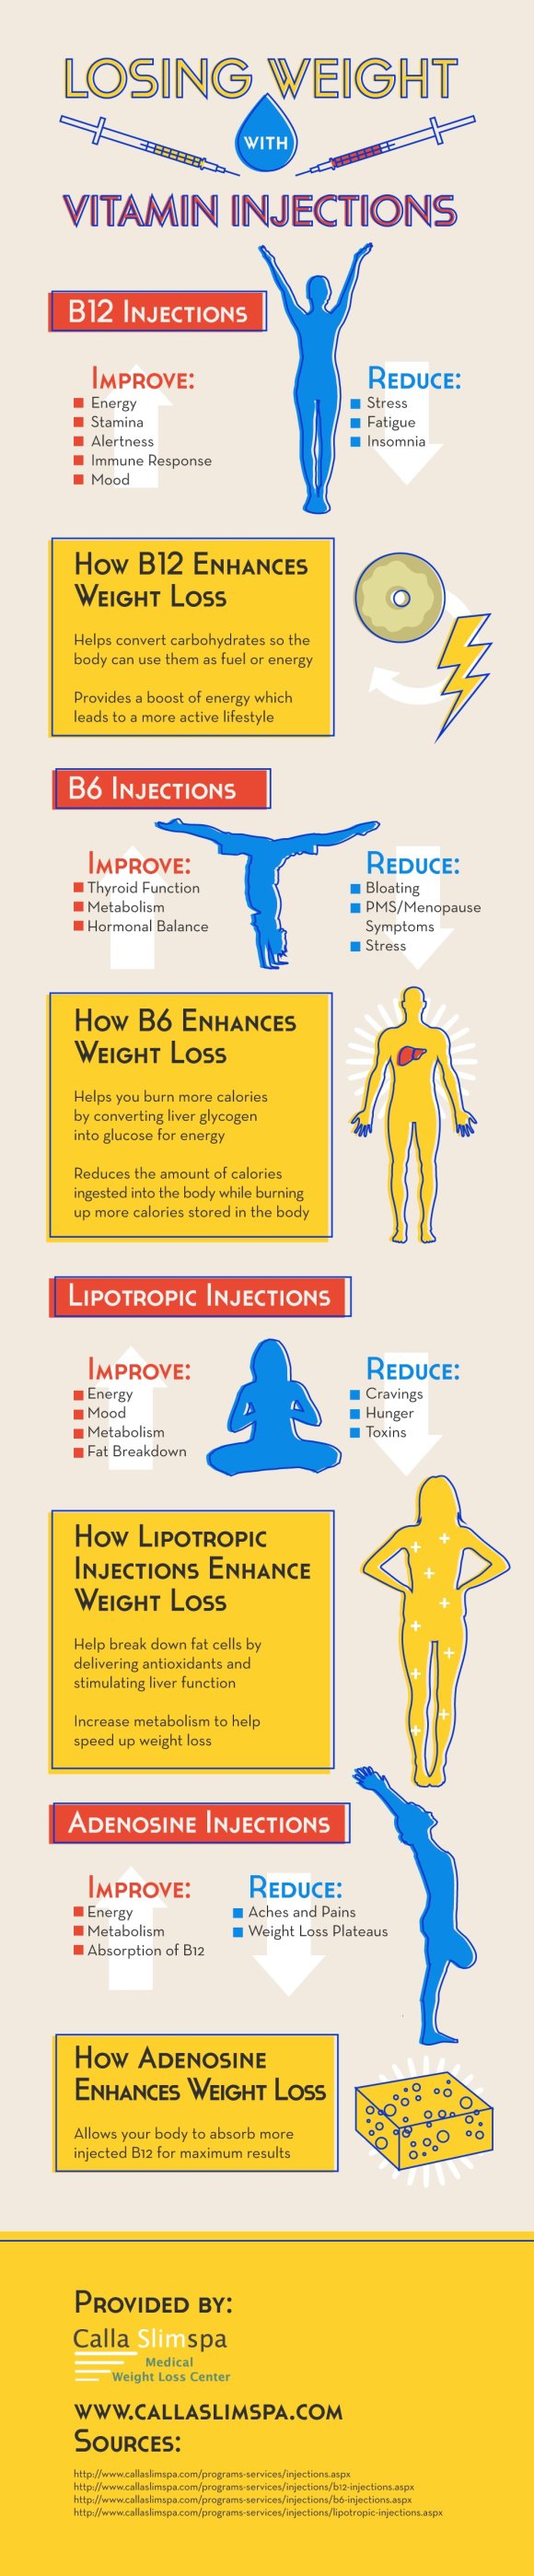 Losing Weight With Vitamin Injections Infographic